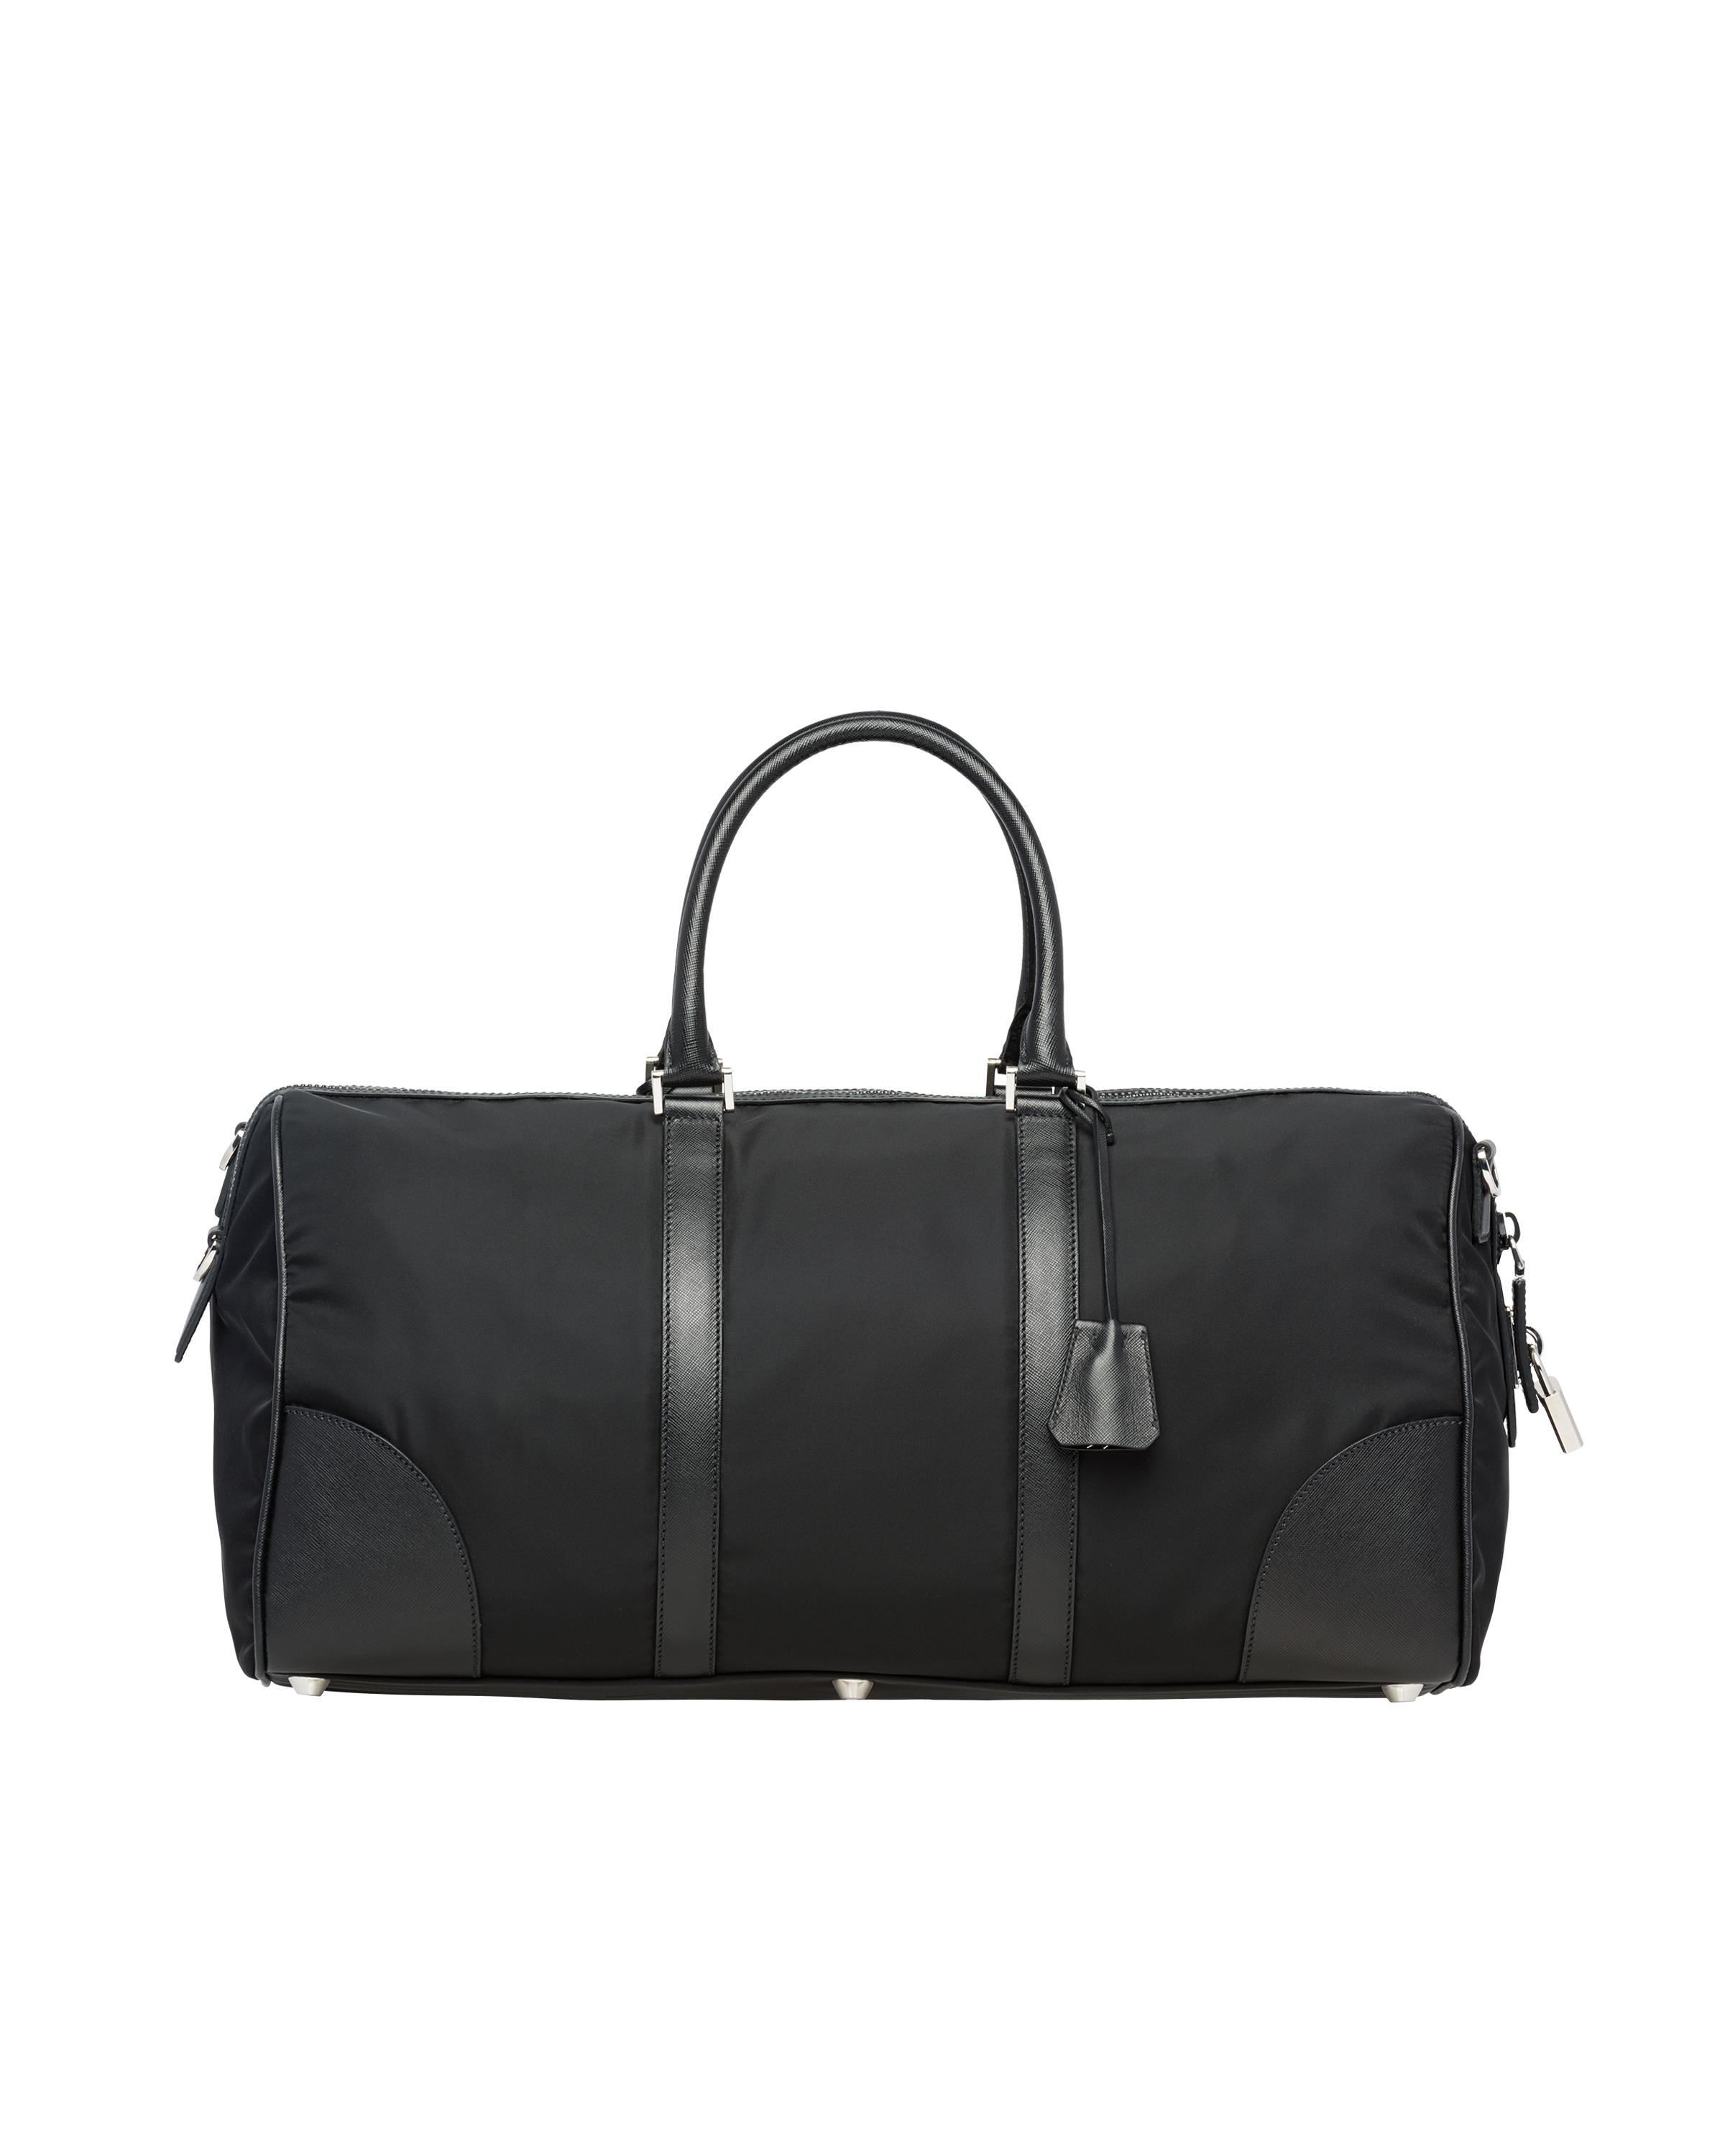 Prada Synthetic Nylon And Saffiano Leather Duffel Bag in Black - Lyst